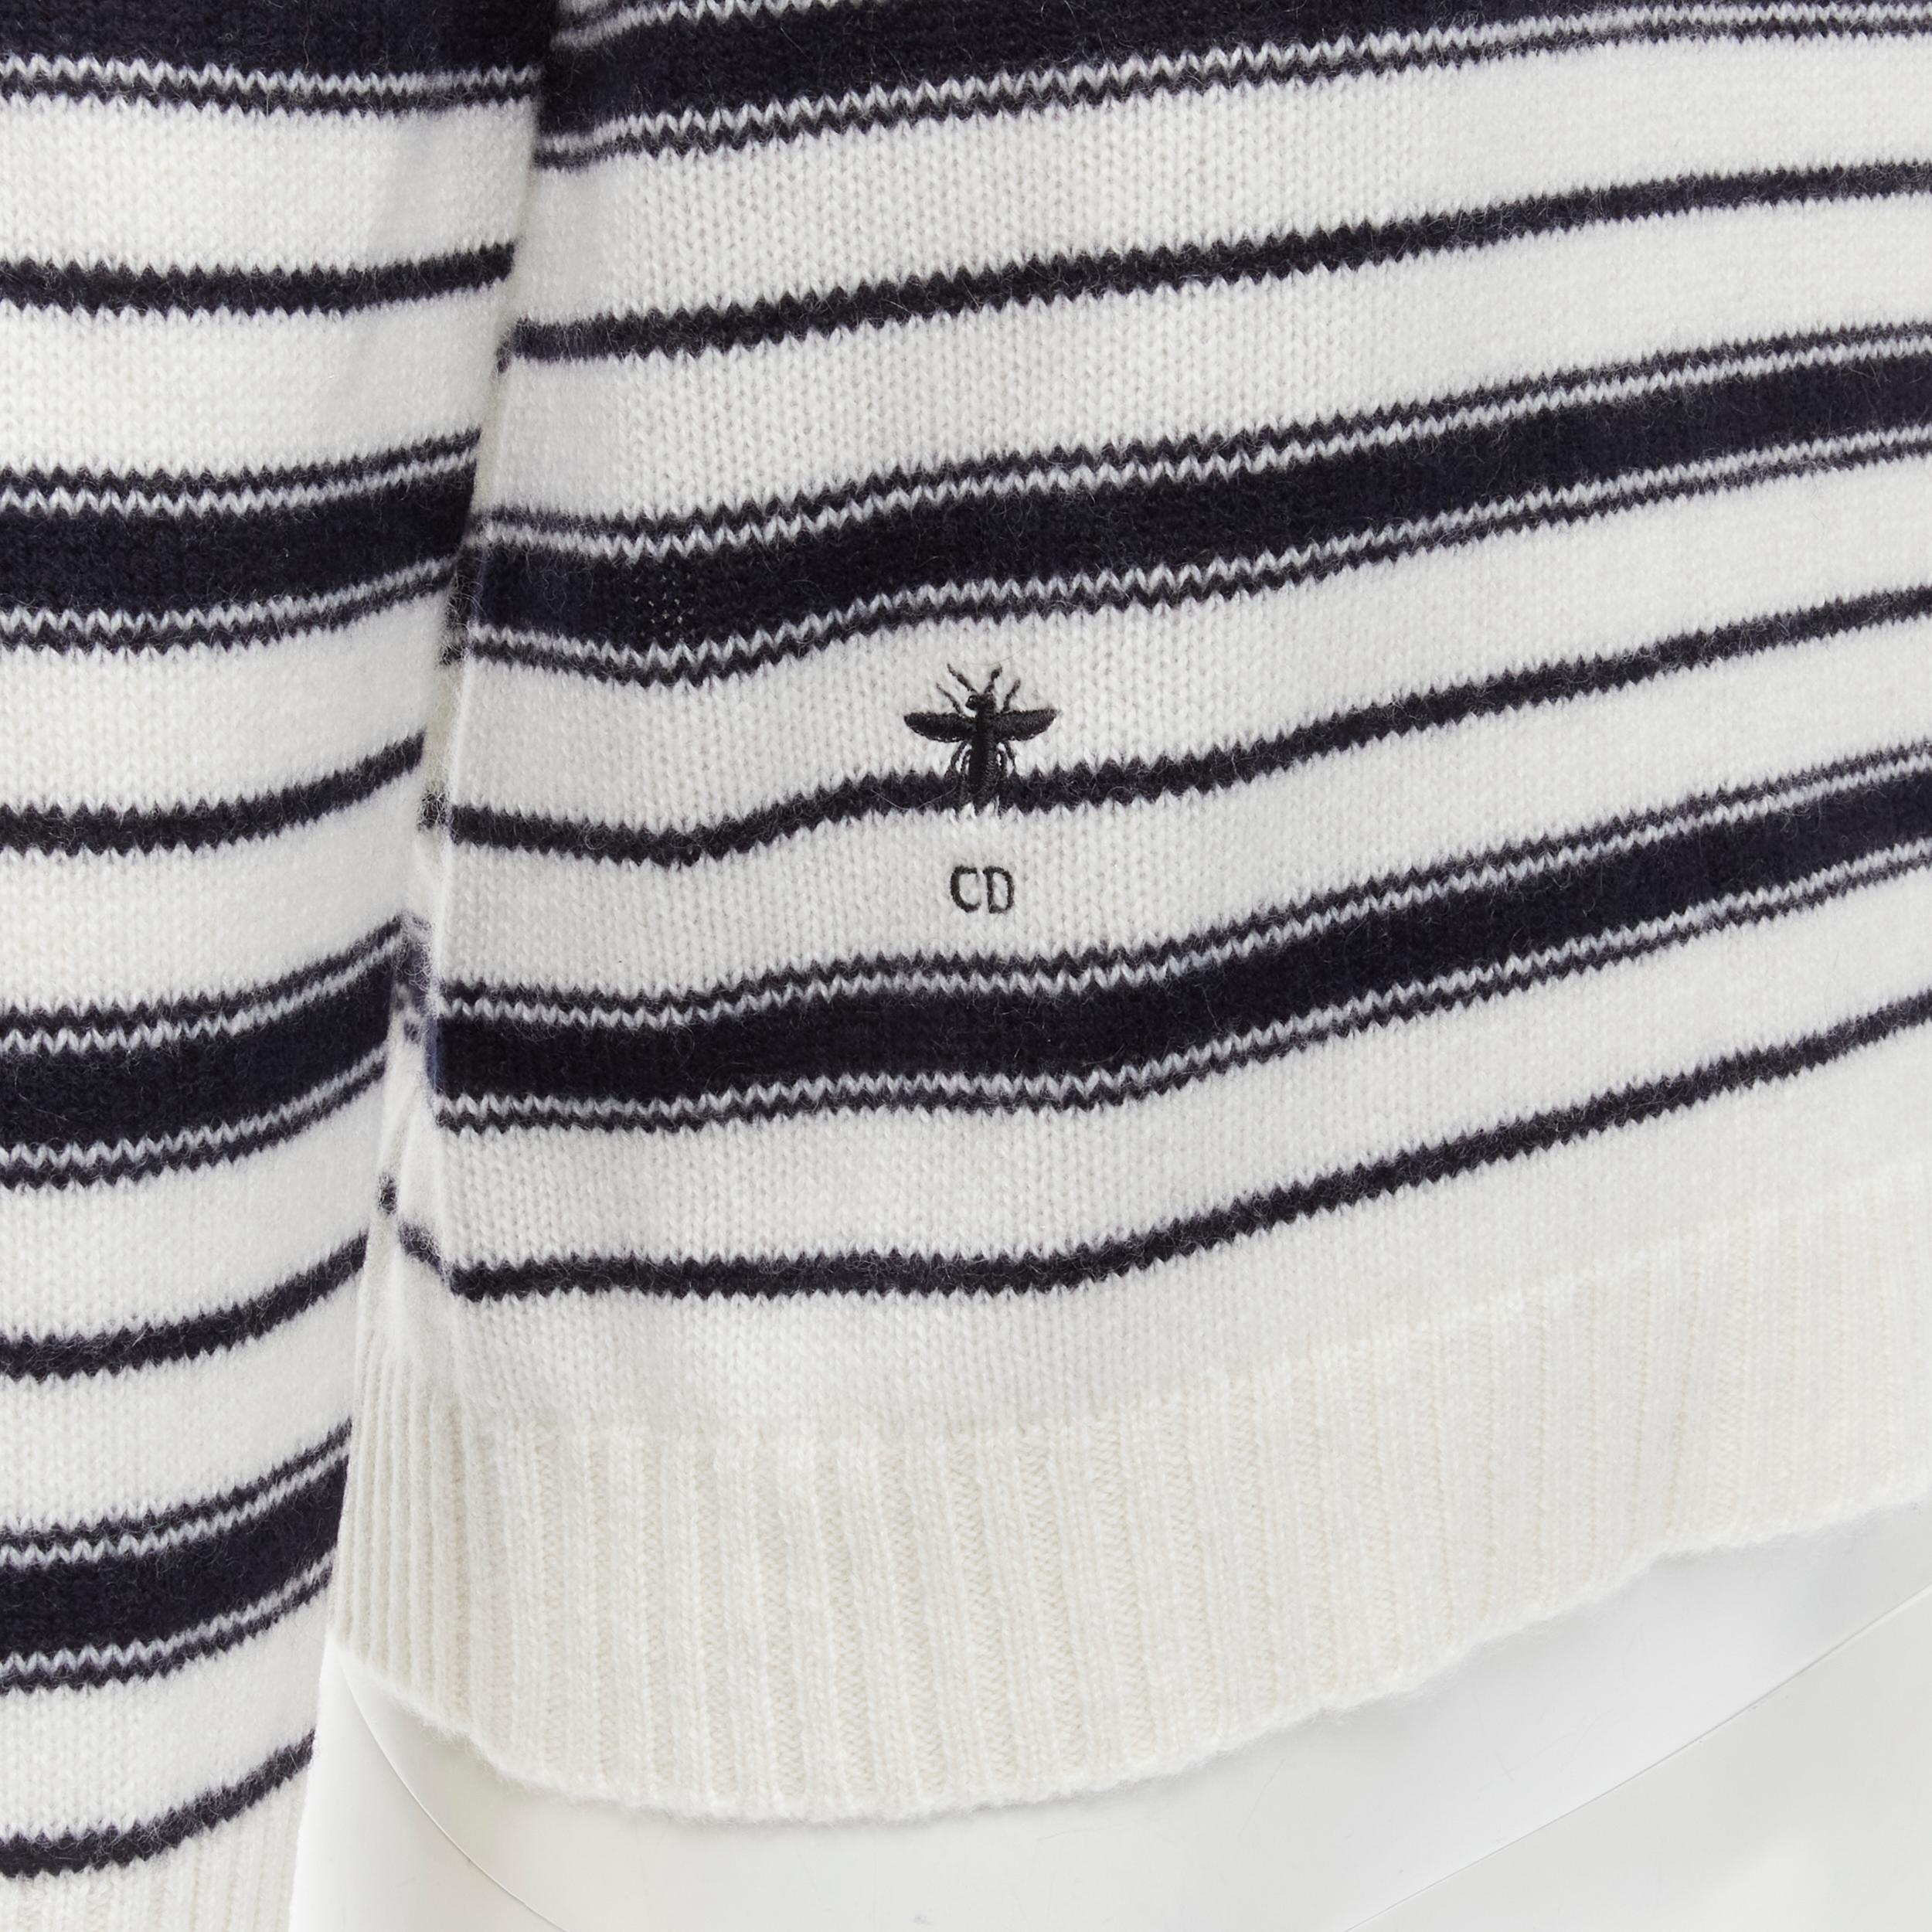 CHRISTIAN DIOR 100% cashmere nautical striped CD Bee embroidery sweater FR36 S
Brand: Christian Dior
Material: Cashmere
Color: White
Pattern: Striped
Extra Detail: Wide neckline. Black Bee CD embroidery at front hem. Dropped shoulder seam.
Made in: